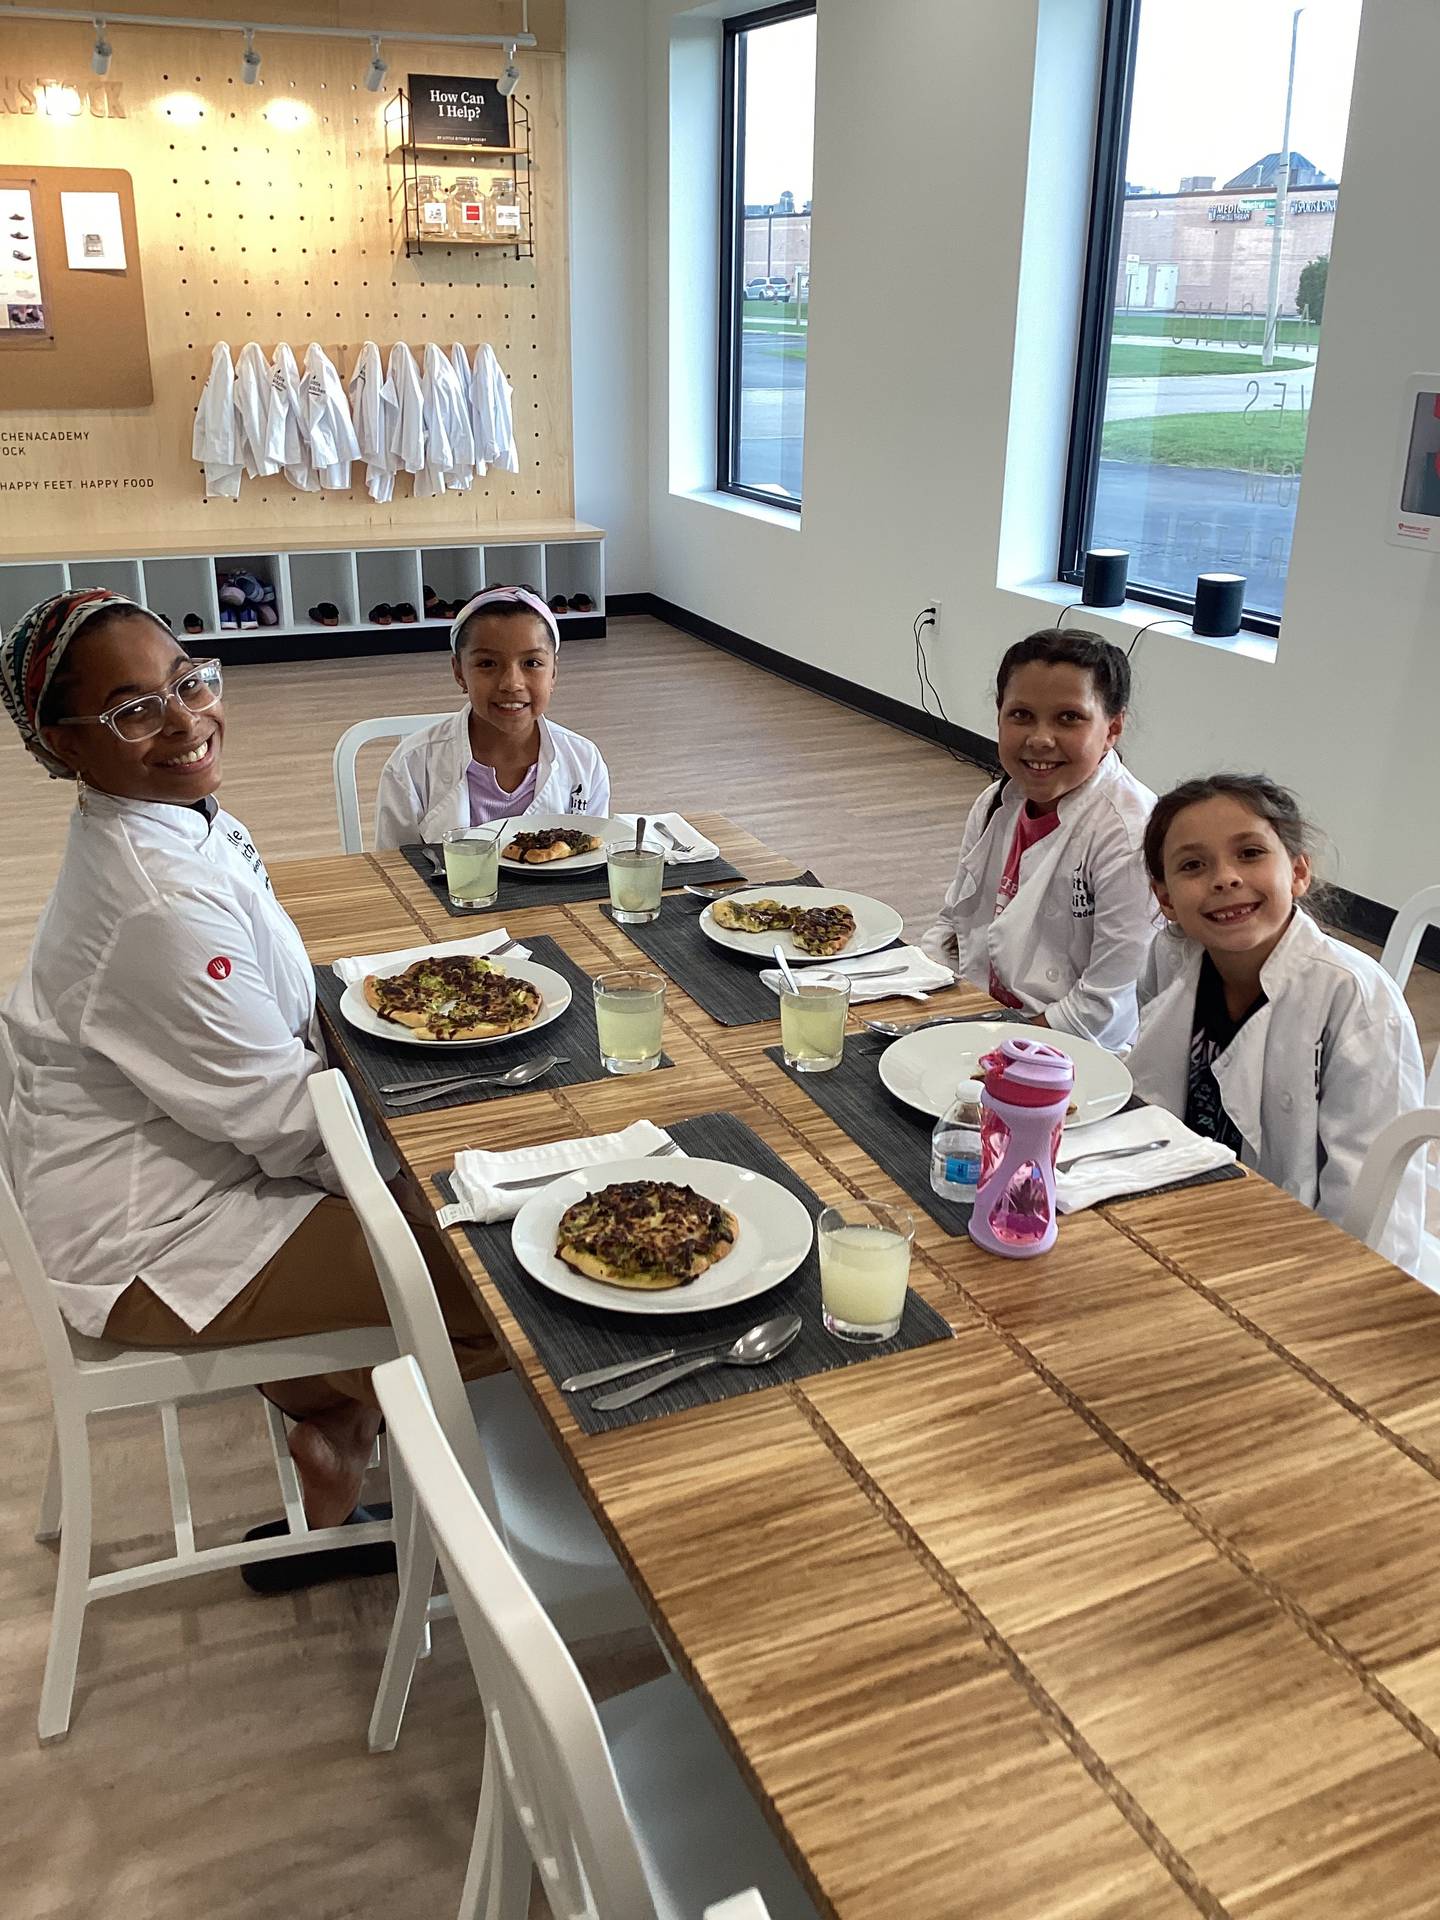 At the end of each Little Kitchen Academy class, a community table is set by the class participants and the kids eat what they made together.